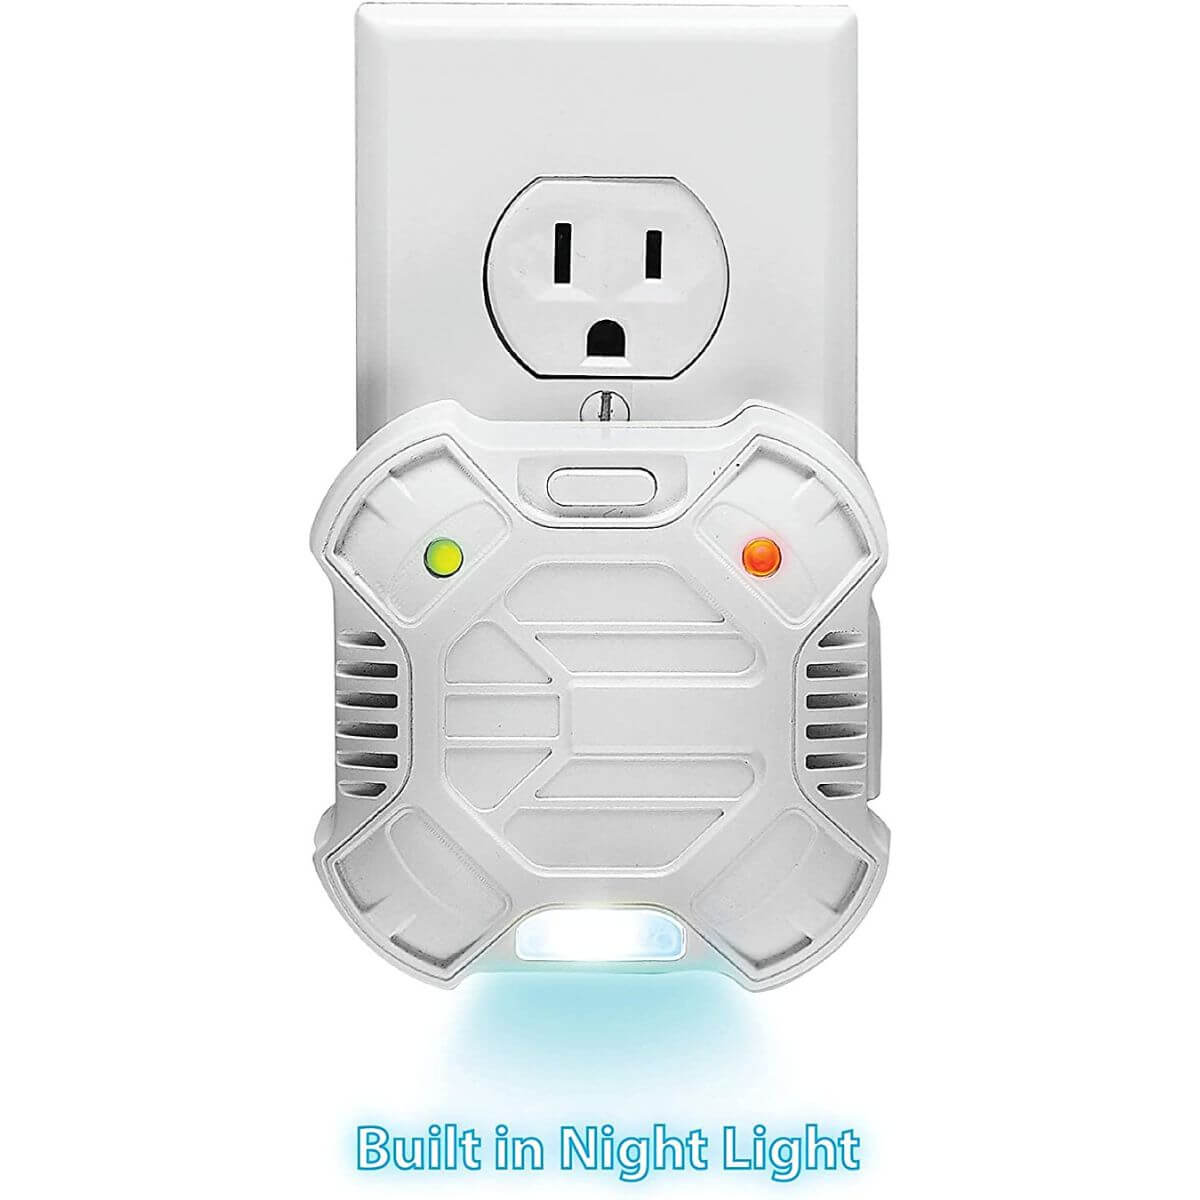 Riddex X Ultrasonic Pest Repeller with plugged in with nightlight on